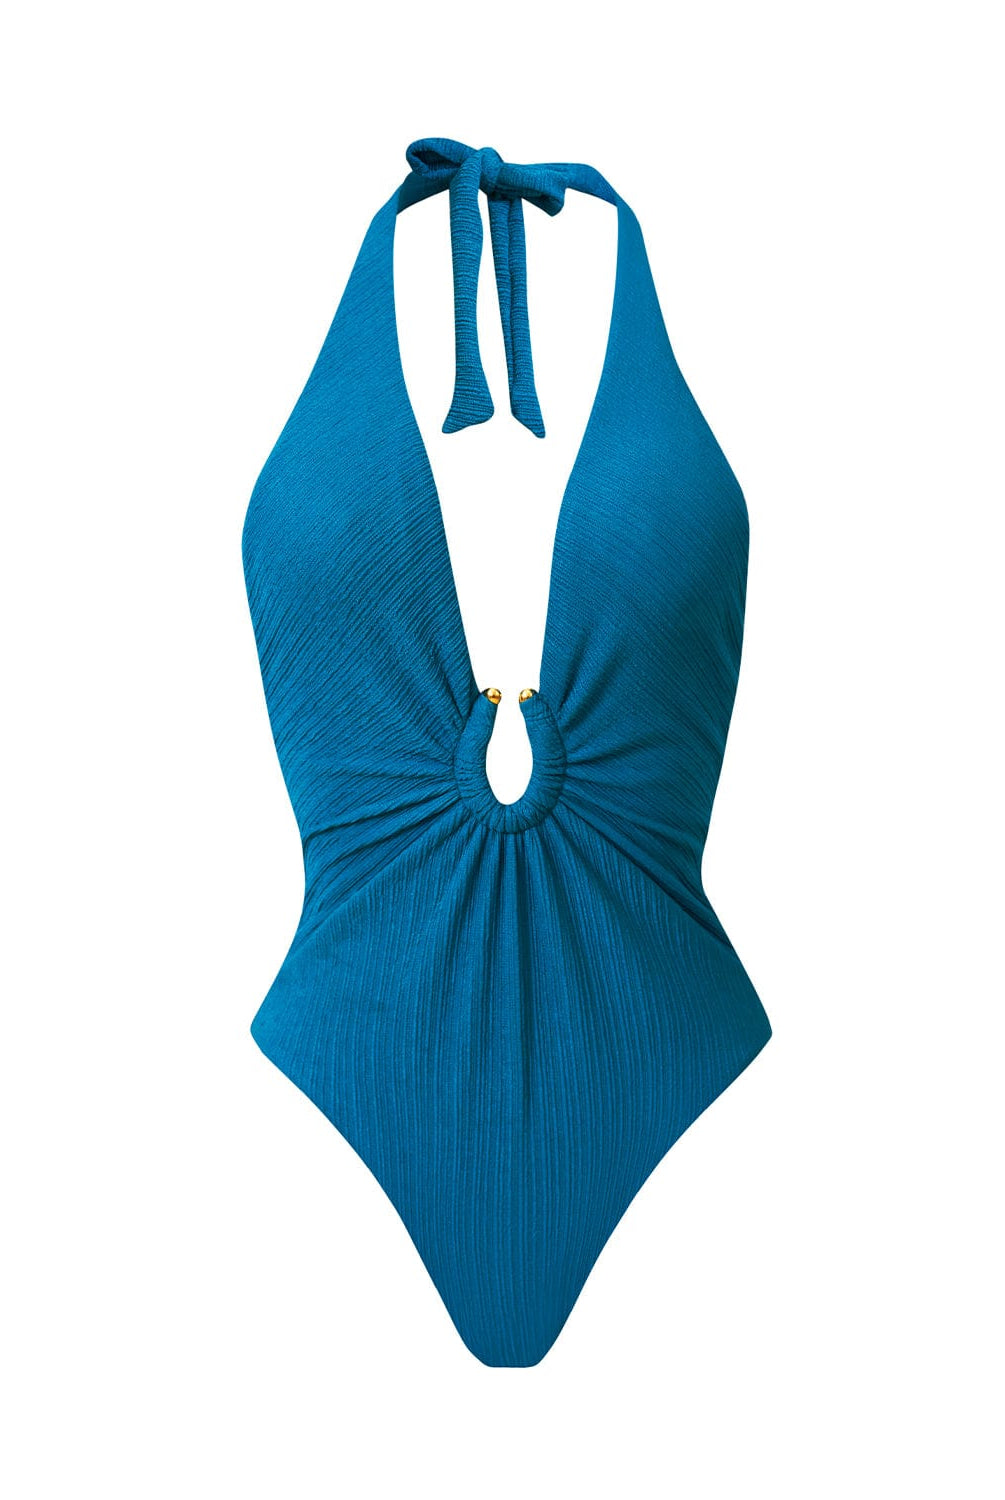 A textured turquoise halter one-piece swimsuit with gold details. Featured against a white wall background.